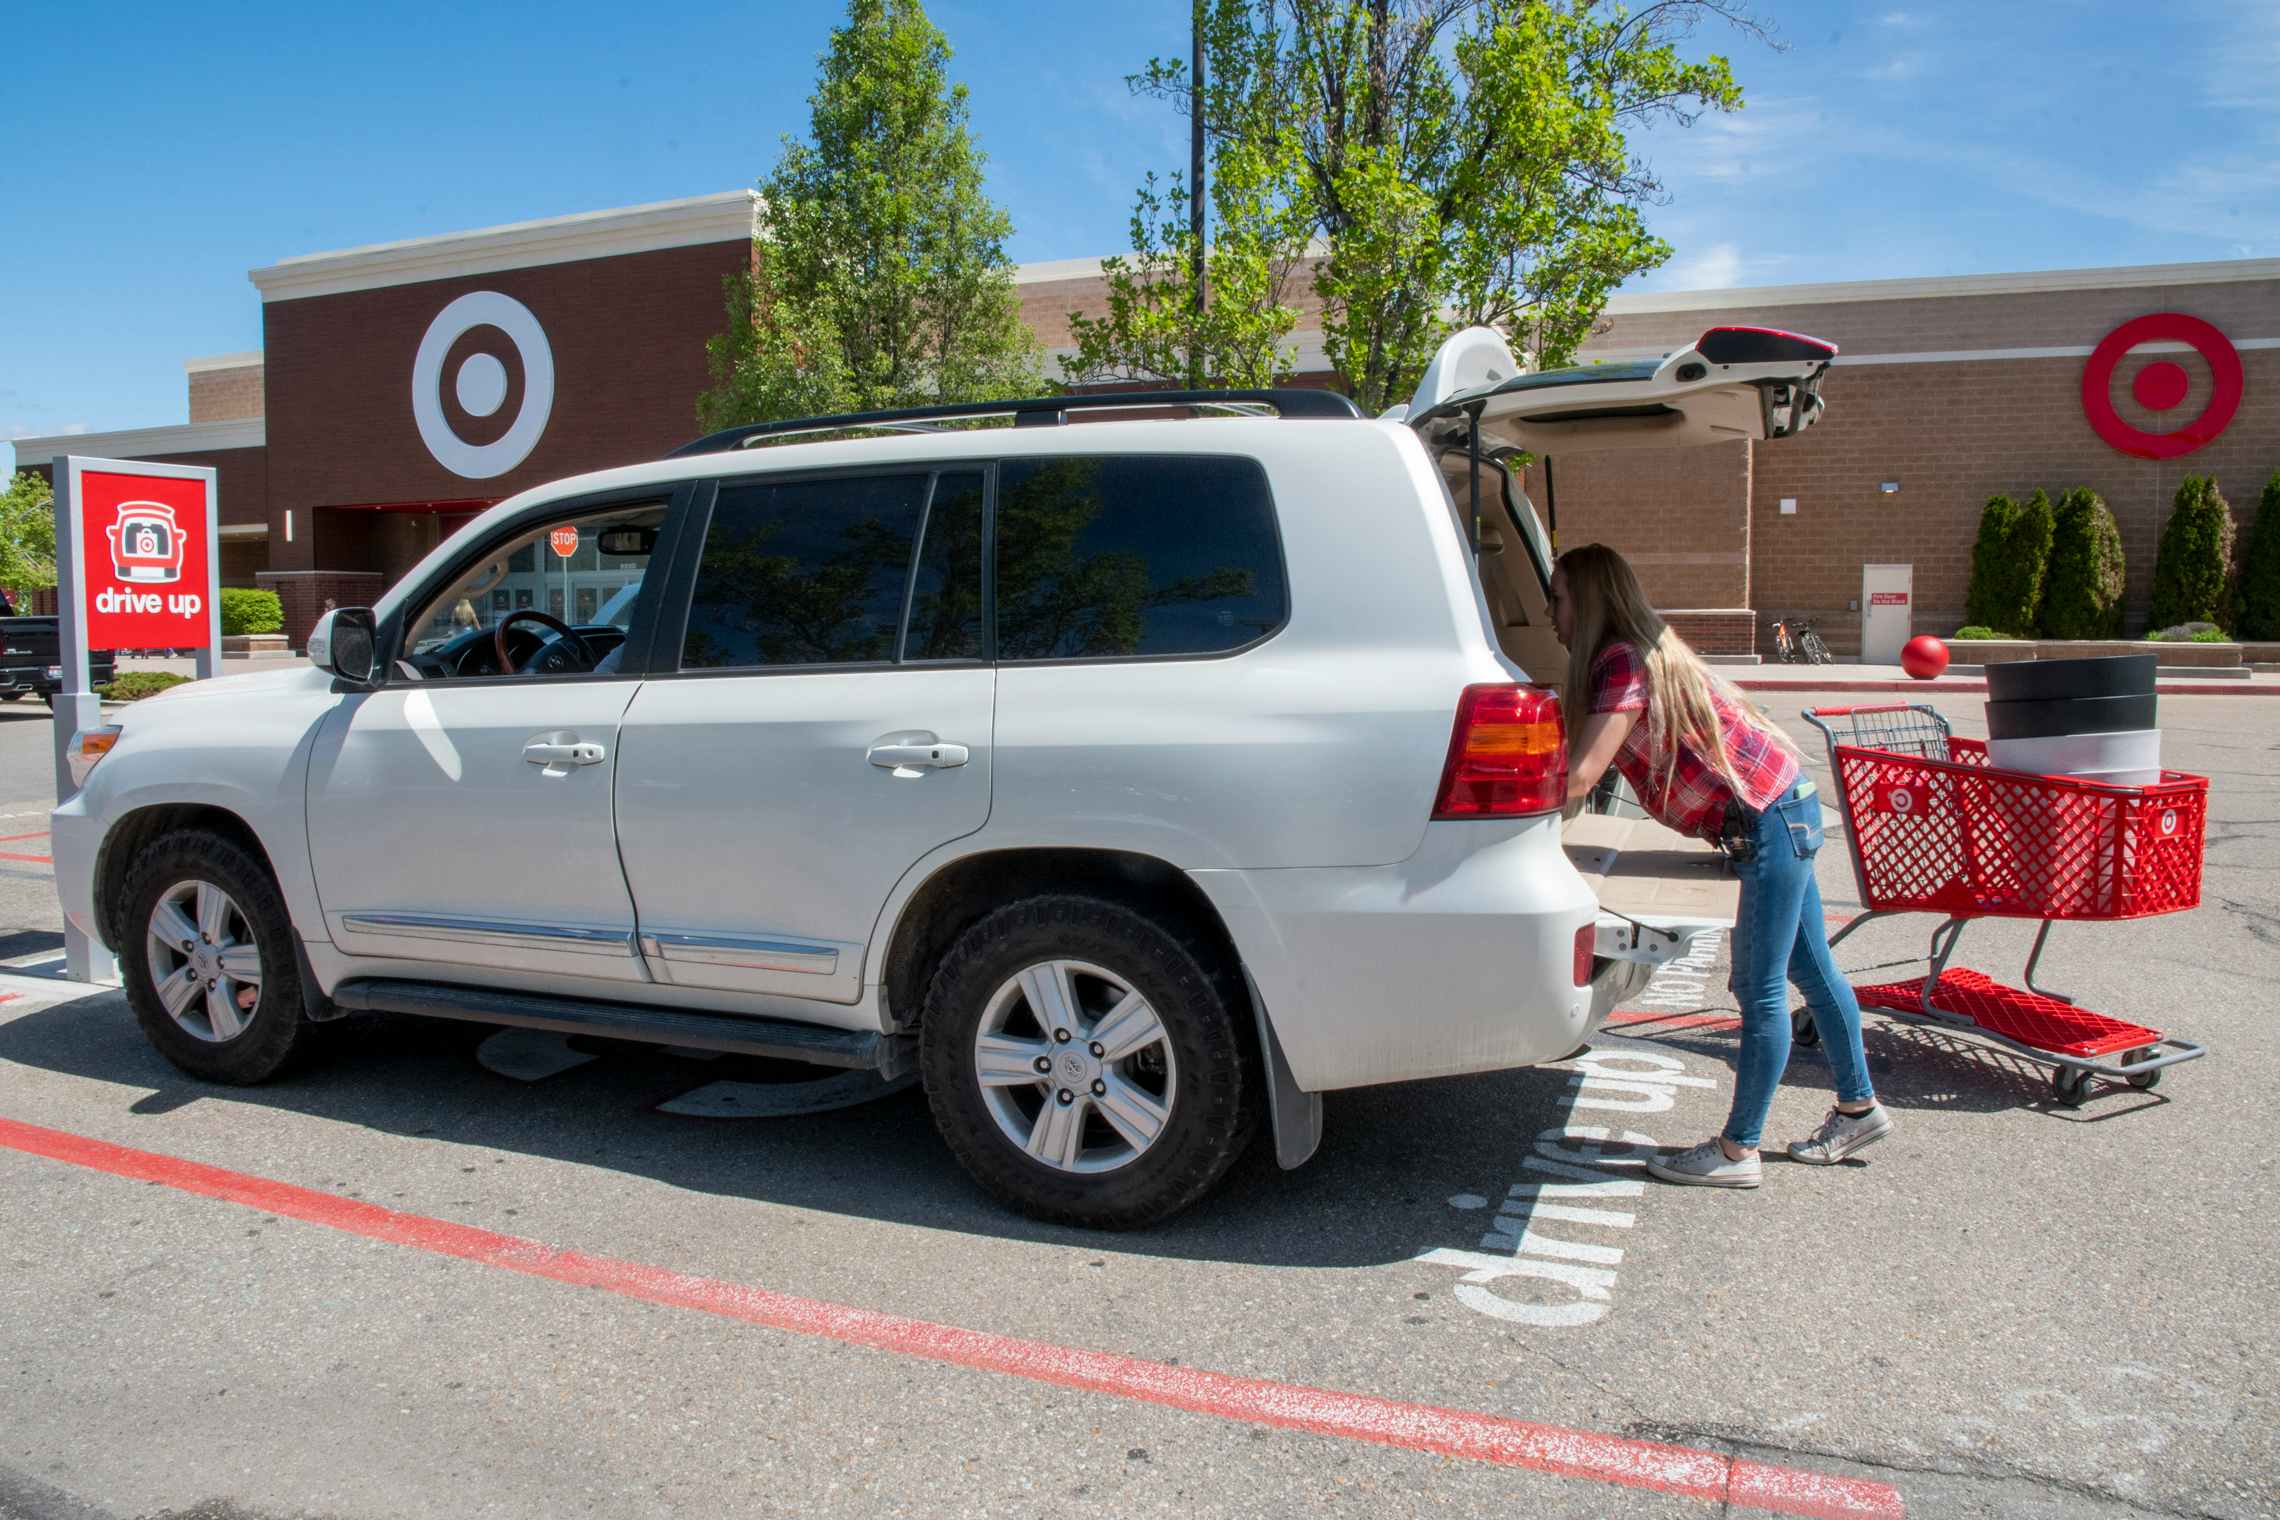 A person standing next to a Target cart, reaching into the open trunk of a vehicle parked in the Drive Up parking spot outside of Target.